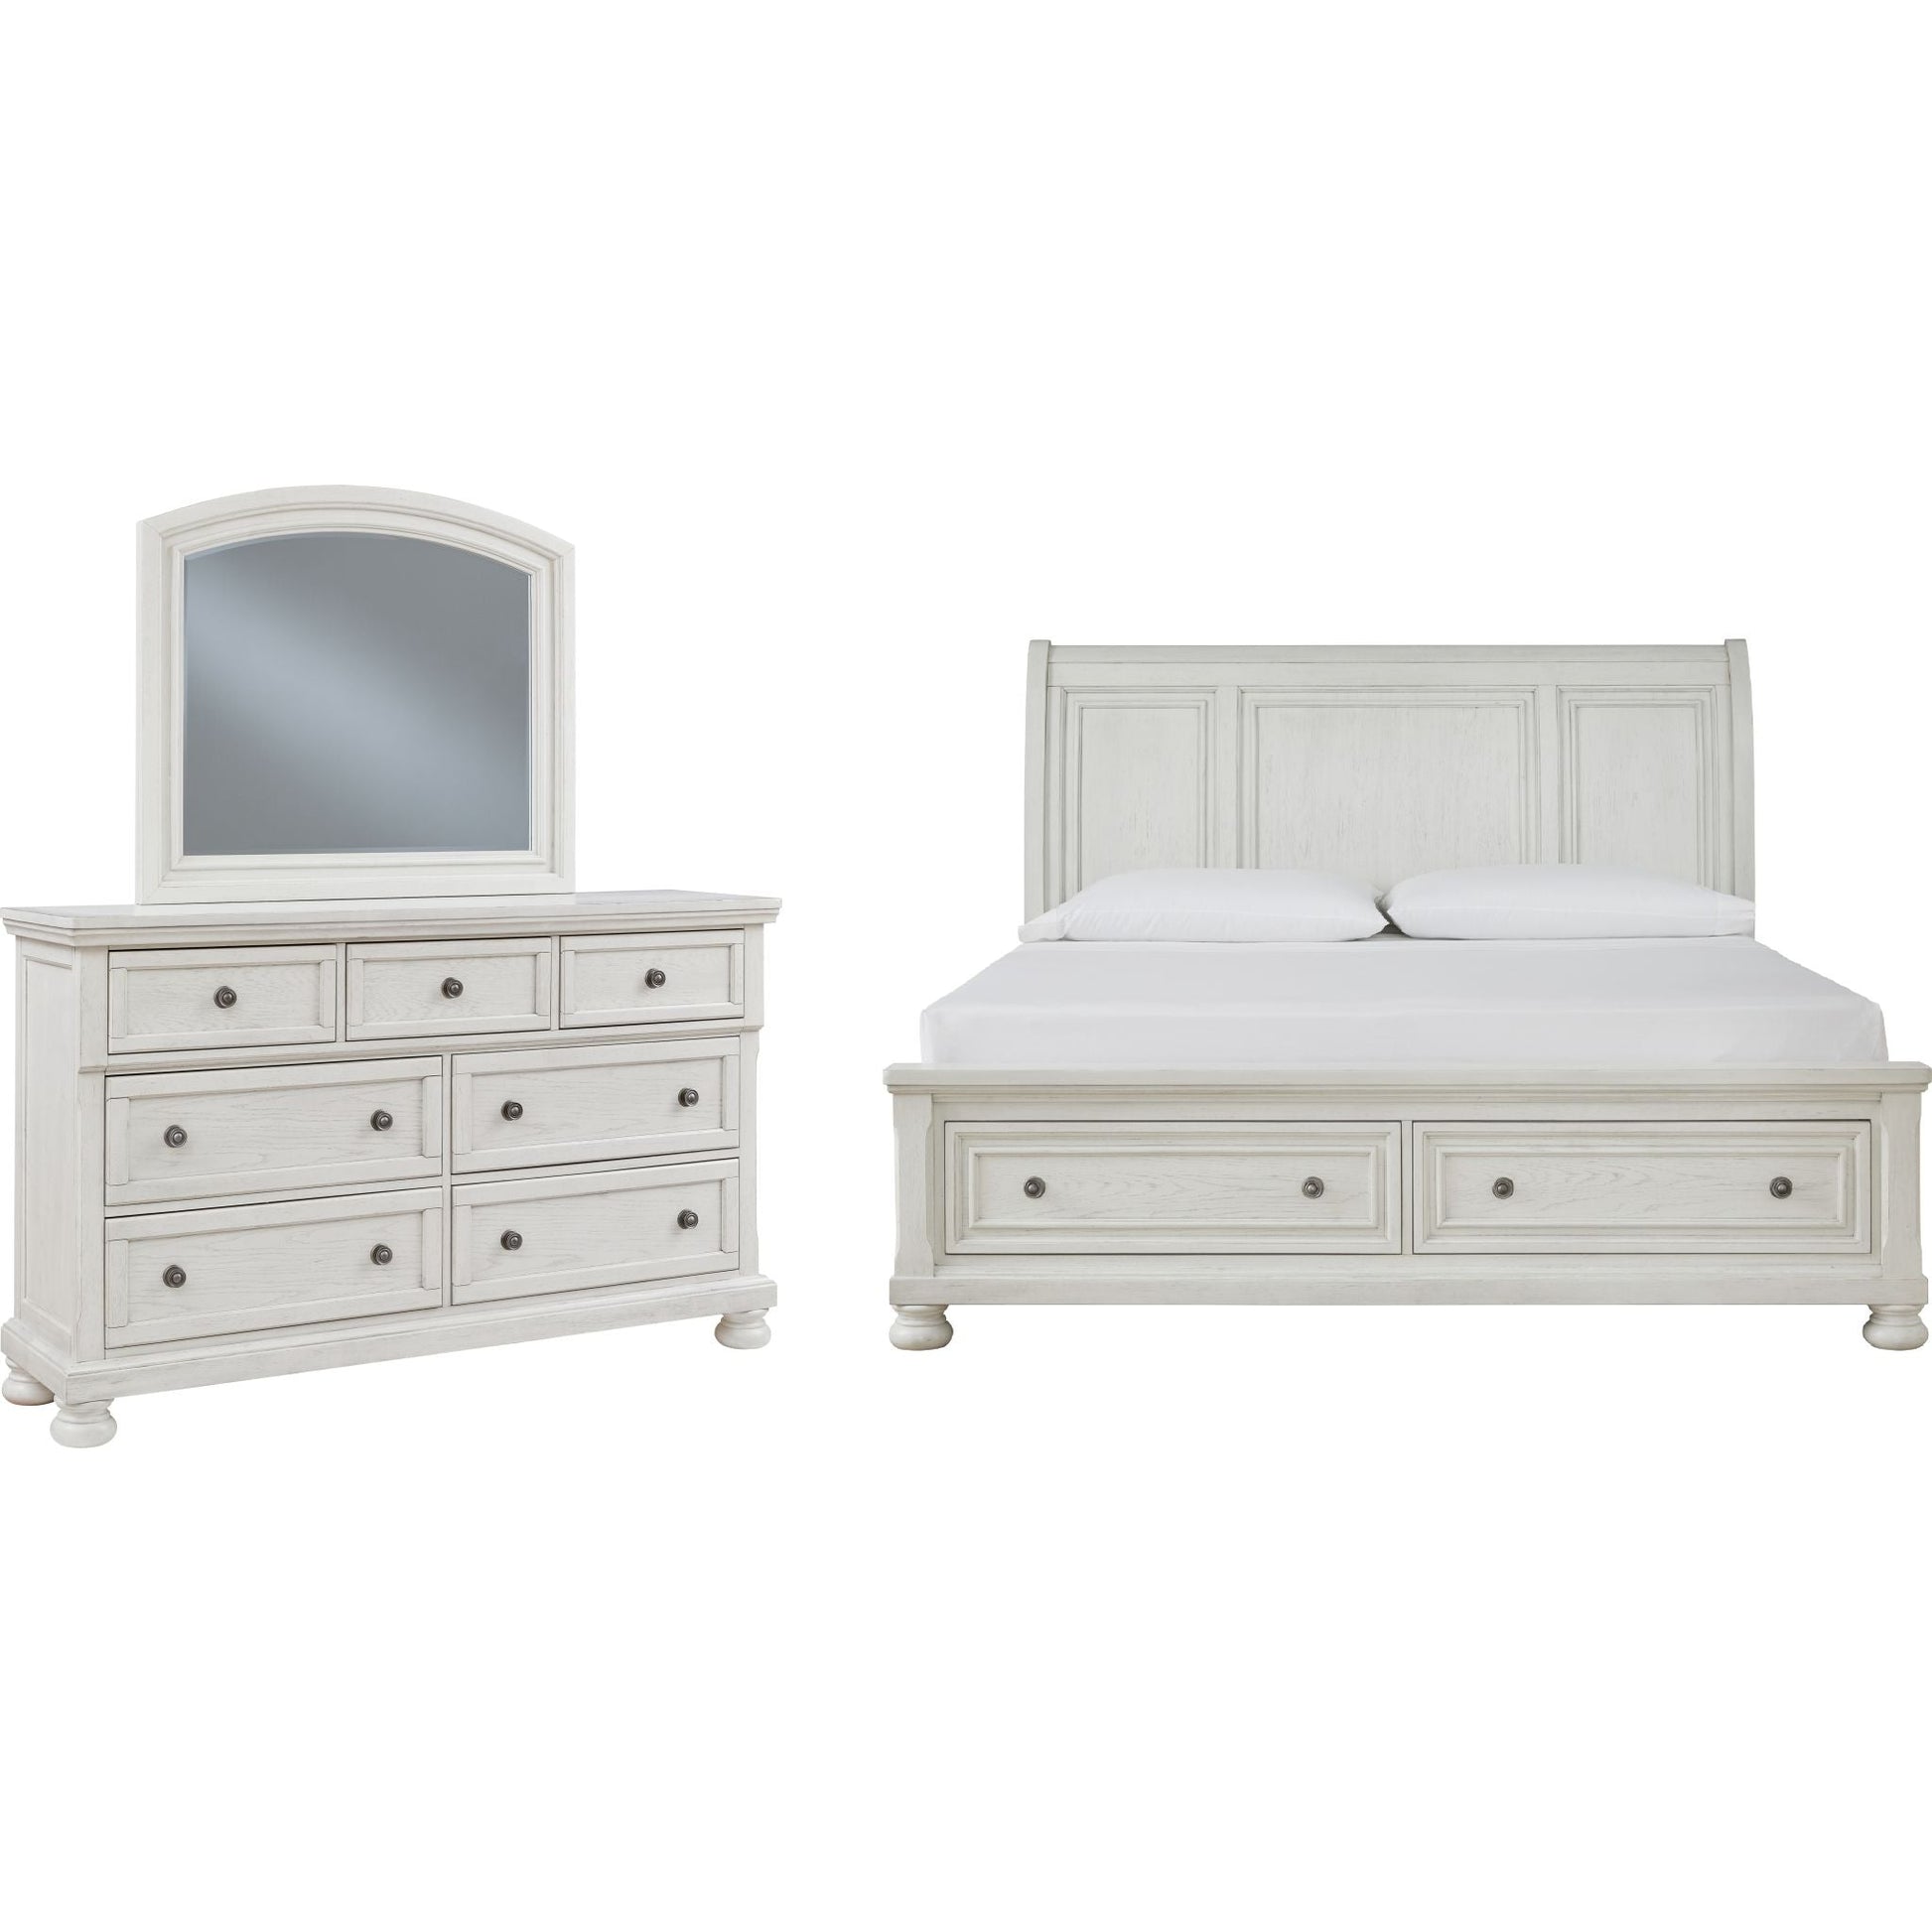 Robbinsdale 5 Piece King Sleigh Bedroom - Antique White